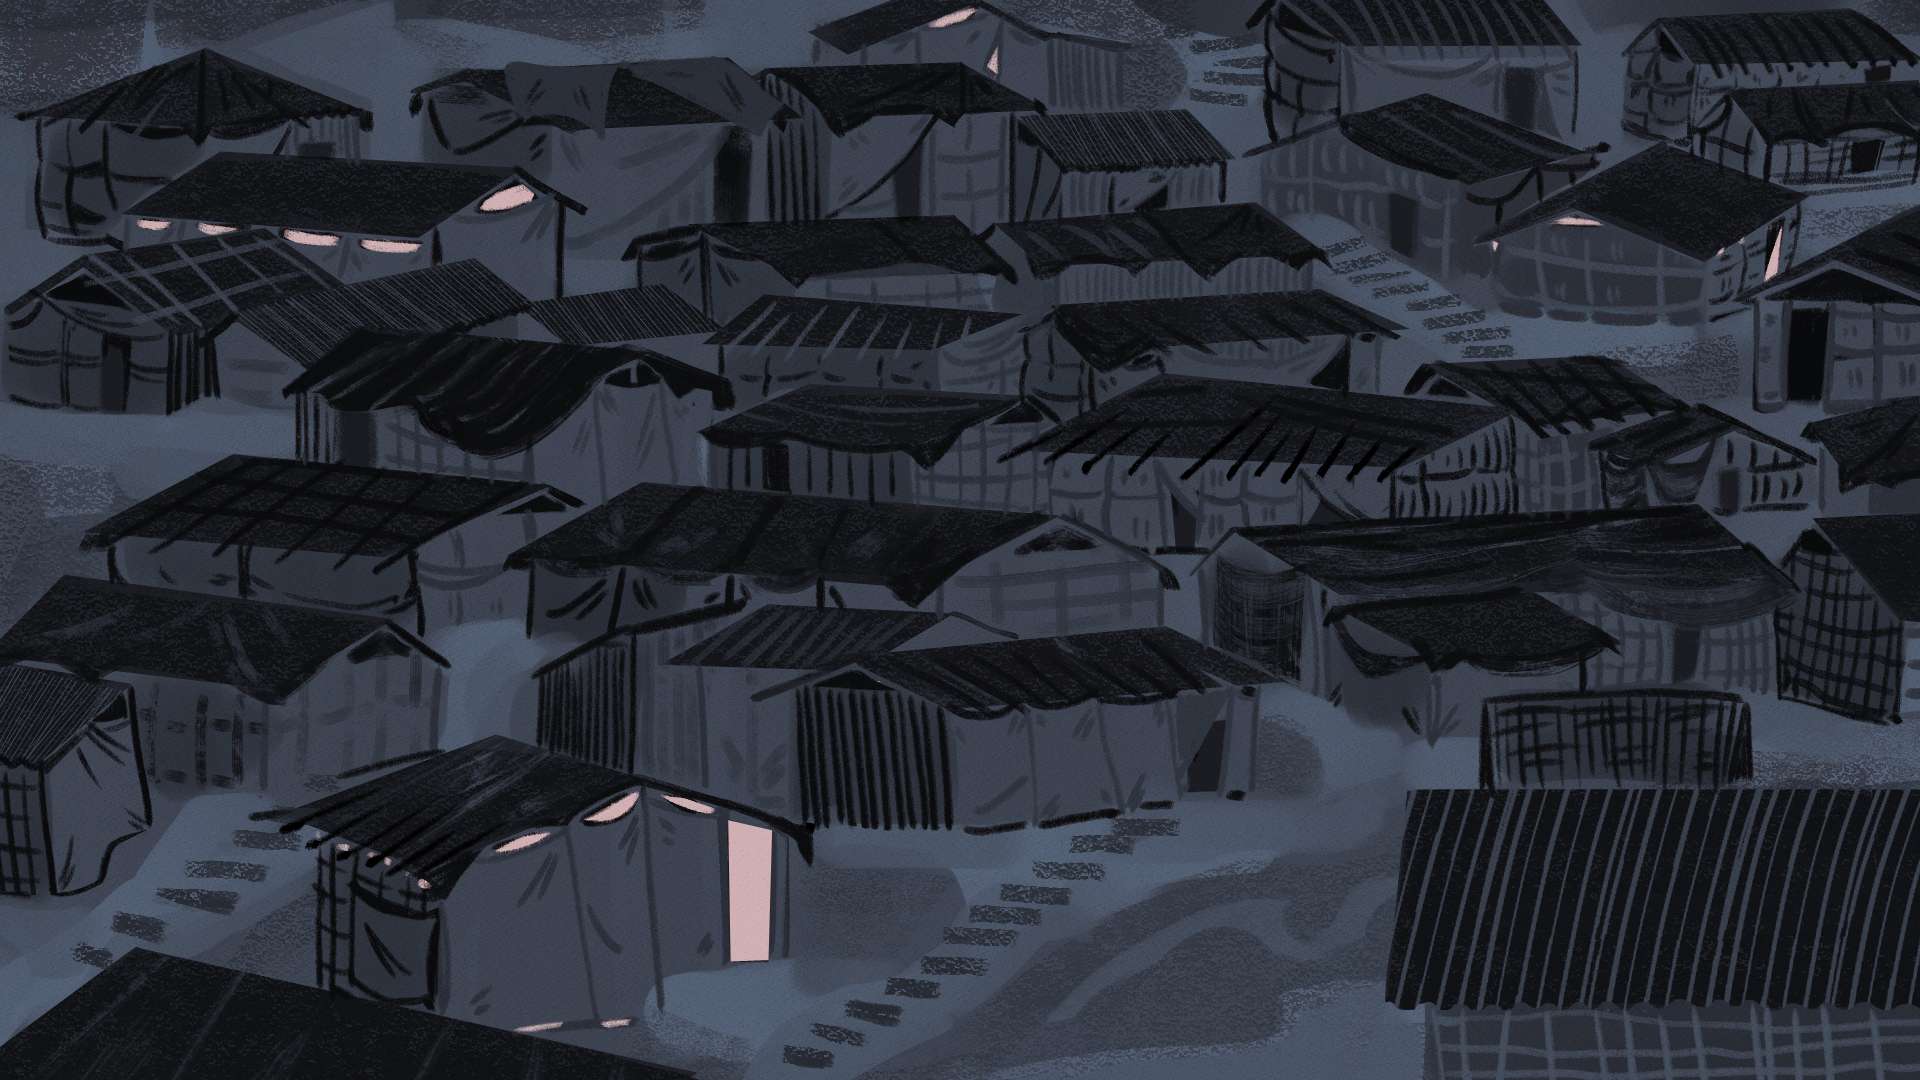 The same tents at night - people disappear and only a few houses lit